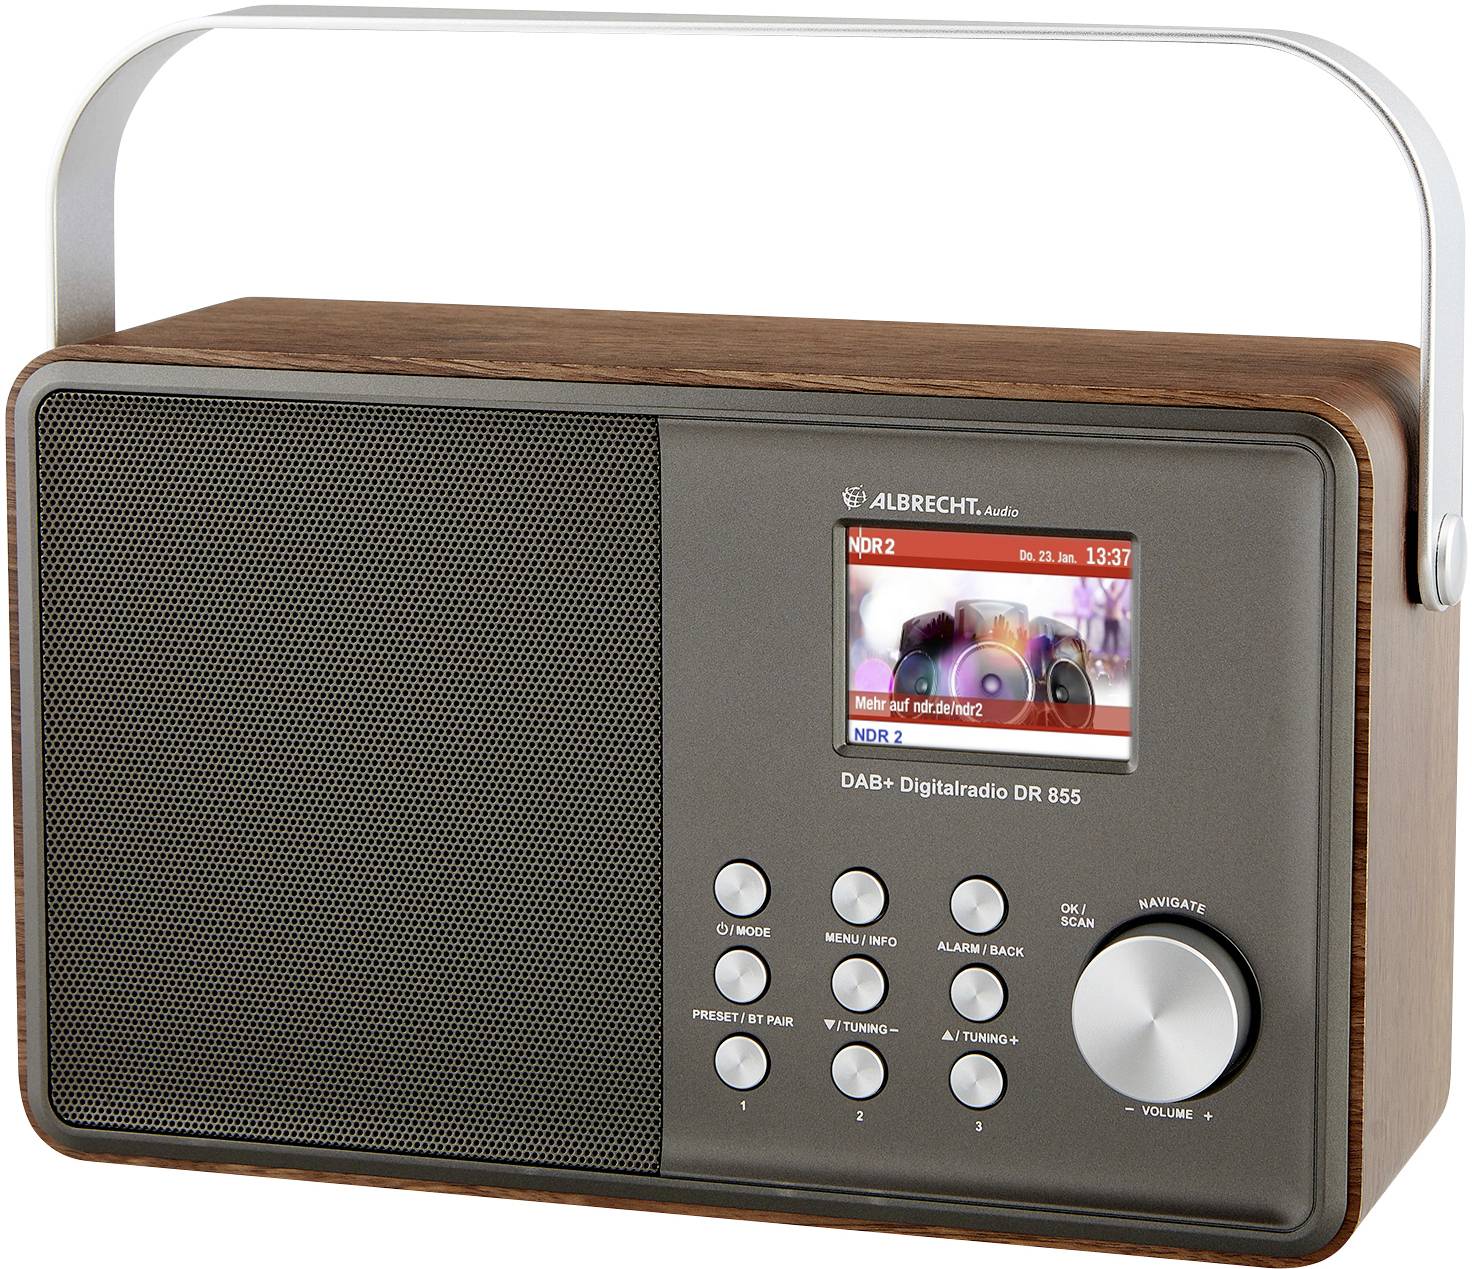 ALBRECHT DR 855 DAB+/UKW/Bluetooth Tischradio DAB+, UKW DAB+, UKW Silber, Holz